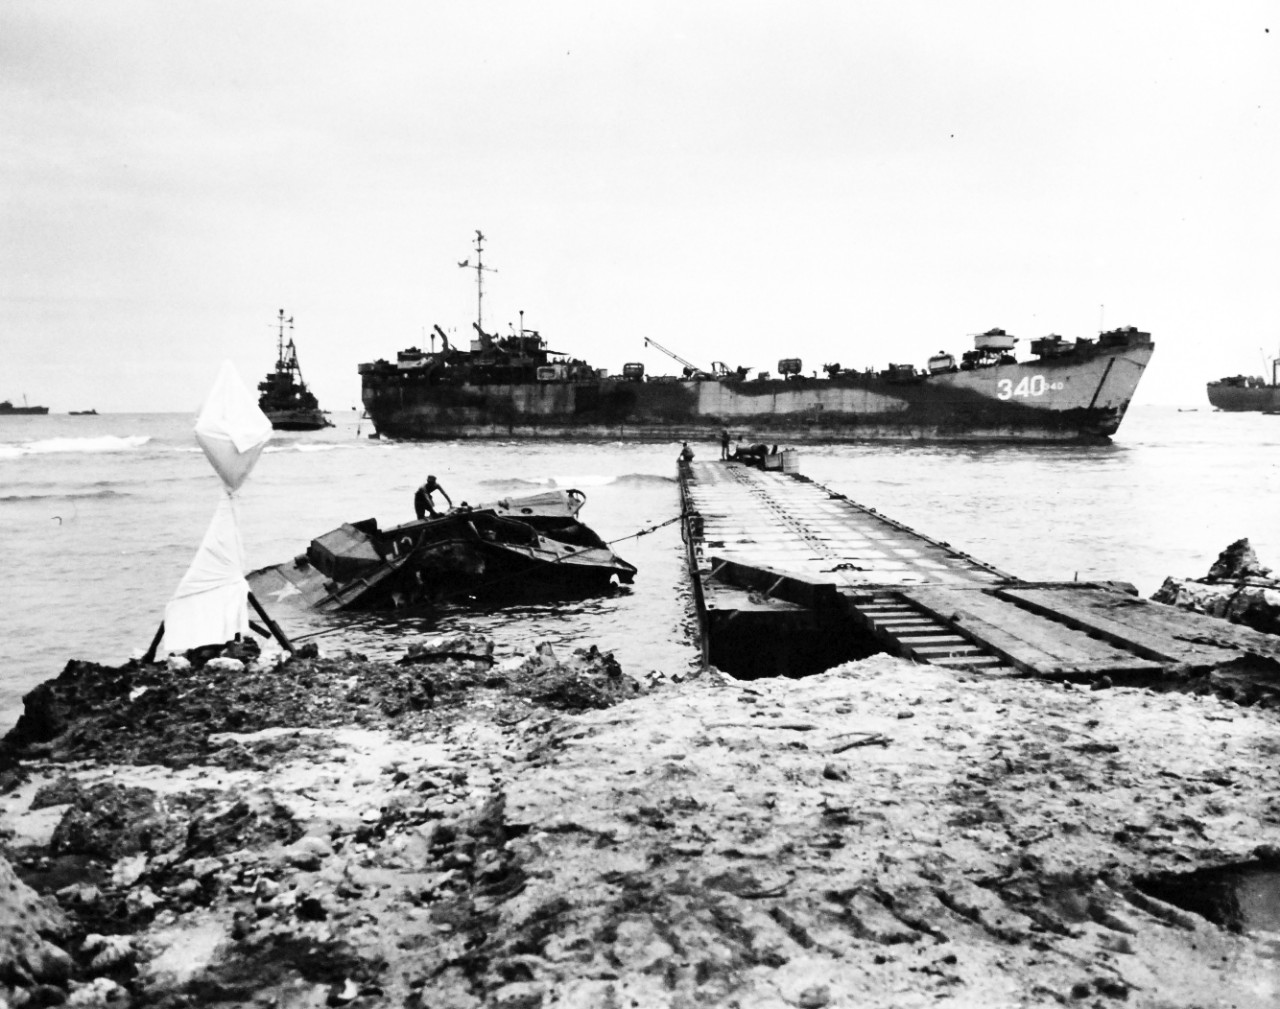 80-G-307883:  Invasion of Tinian, July-August 1944.   USS LST-340 at pontoon pier on White Beach 2, TA 639, Tinian Island during invasion. Photograph received March 20, 1945.      Official U.S. Navy photograph, now in the collections of the U.S. Navy.  (2017/04/11).  